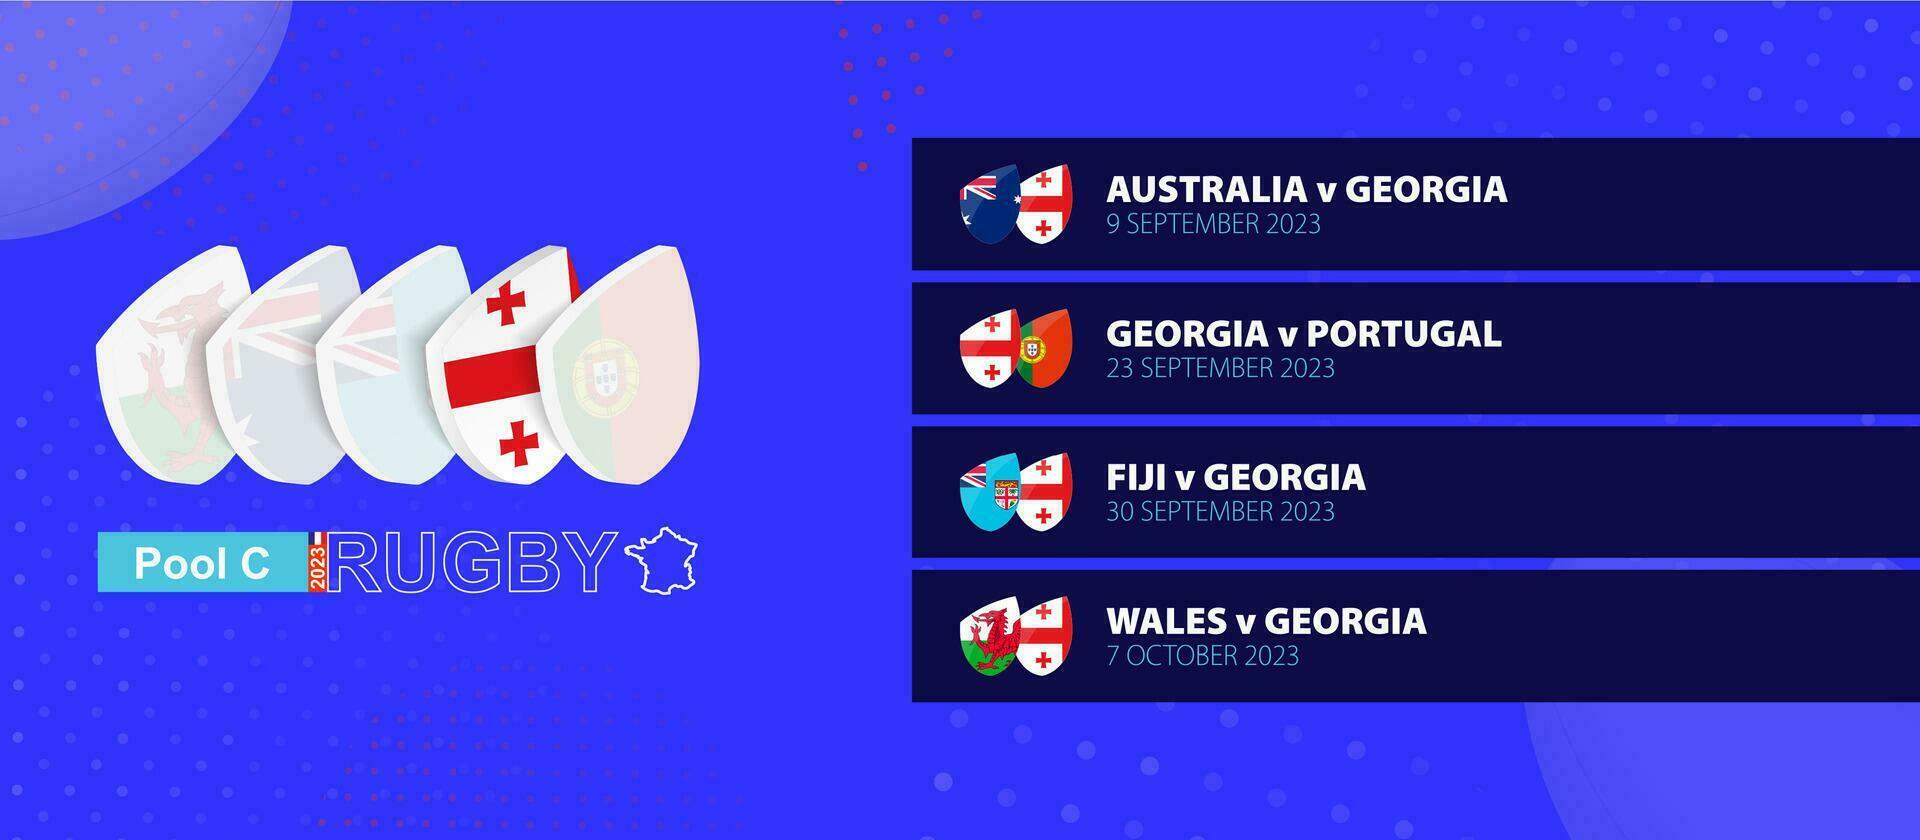 Georgia rugby national team schedule matches in group stage of international rugby competition. vector